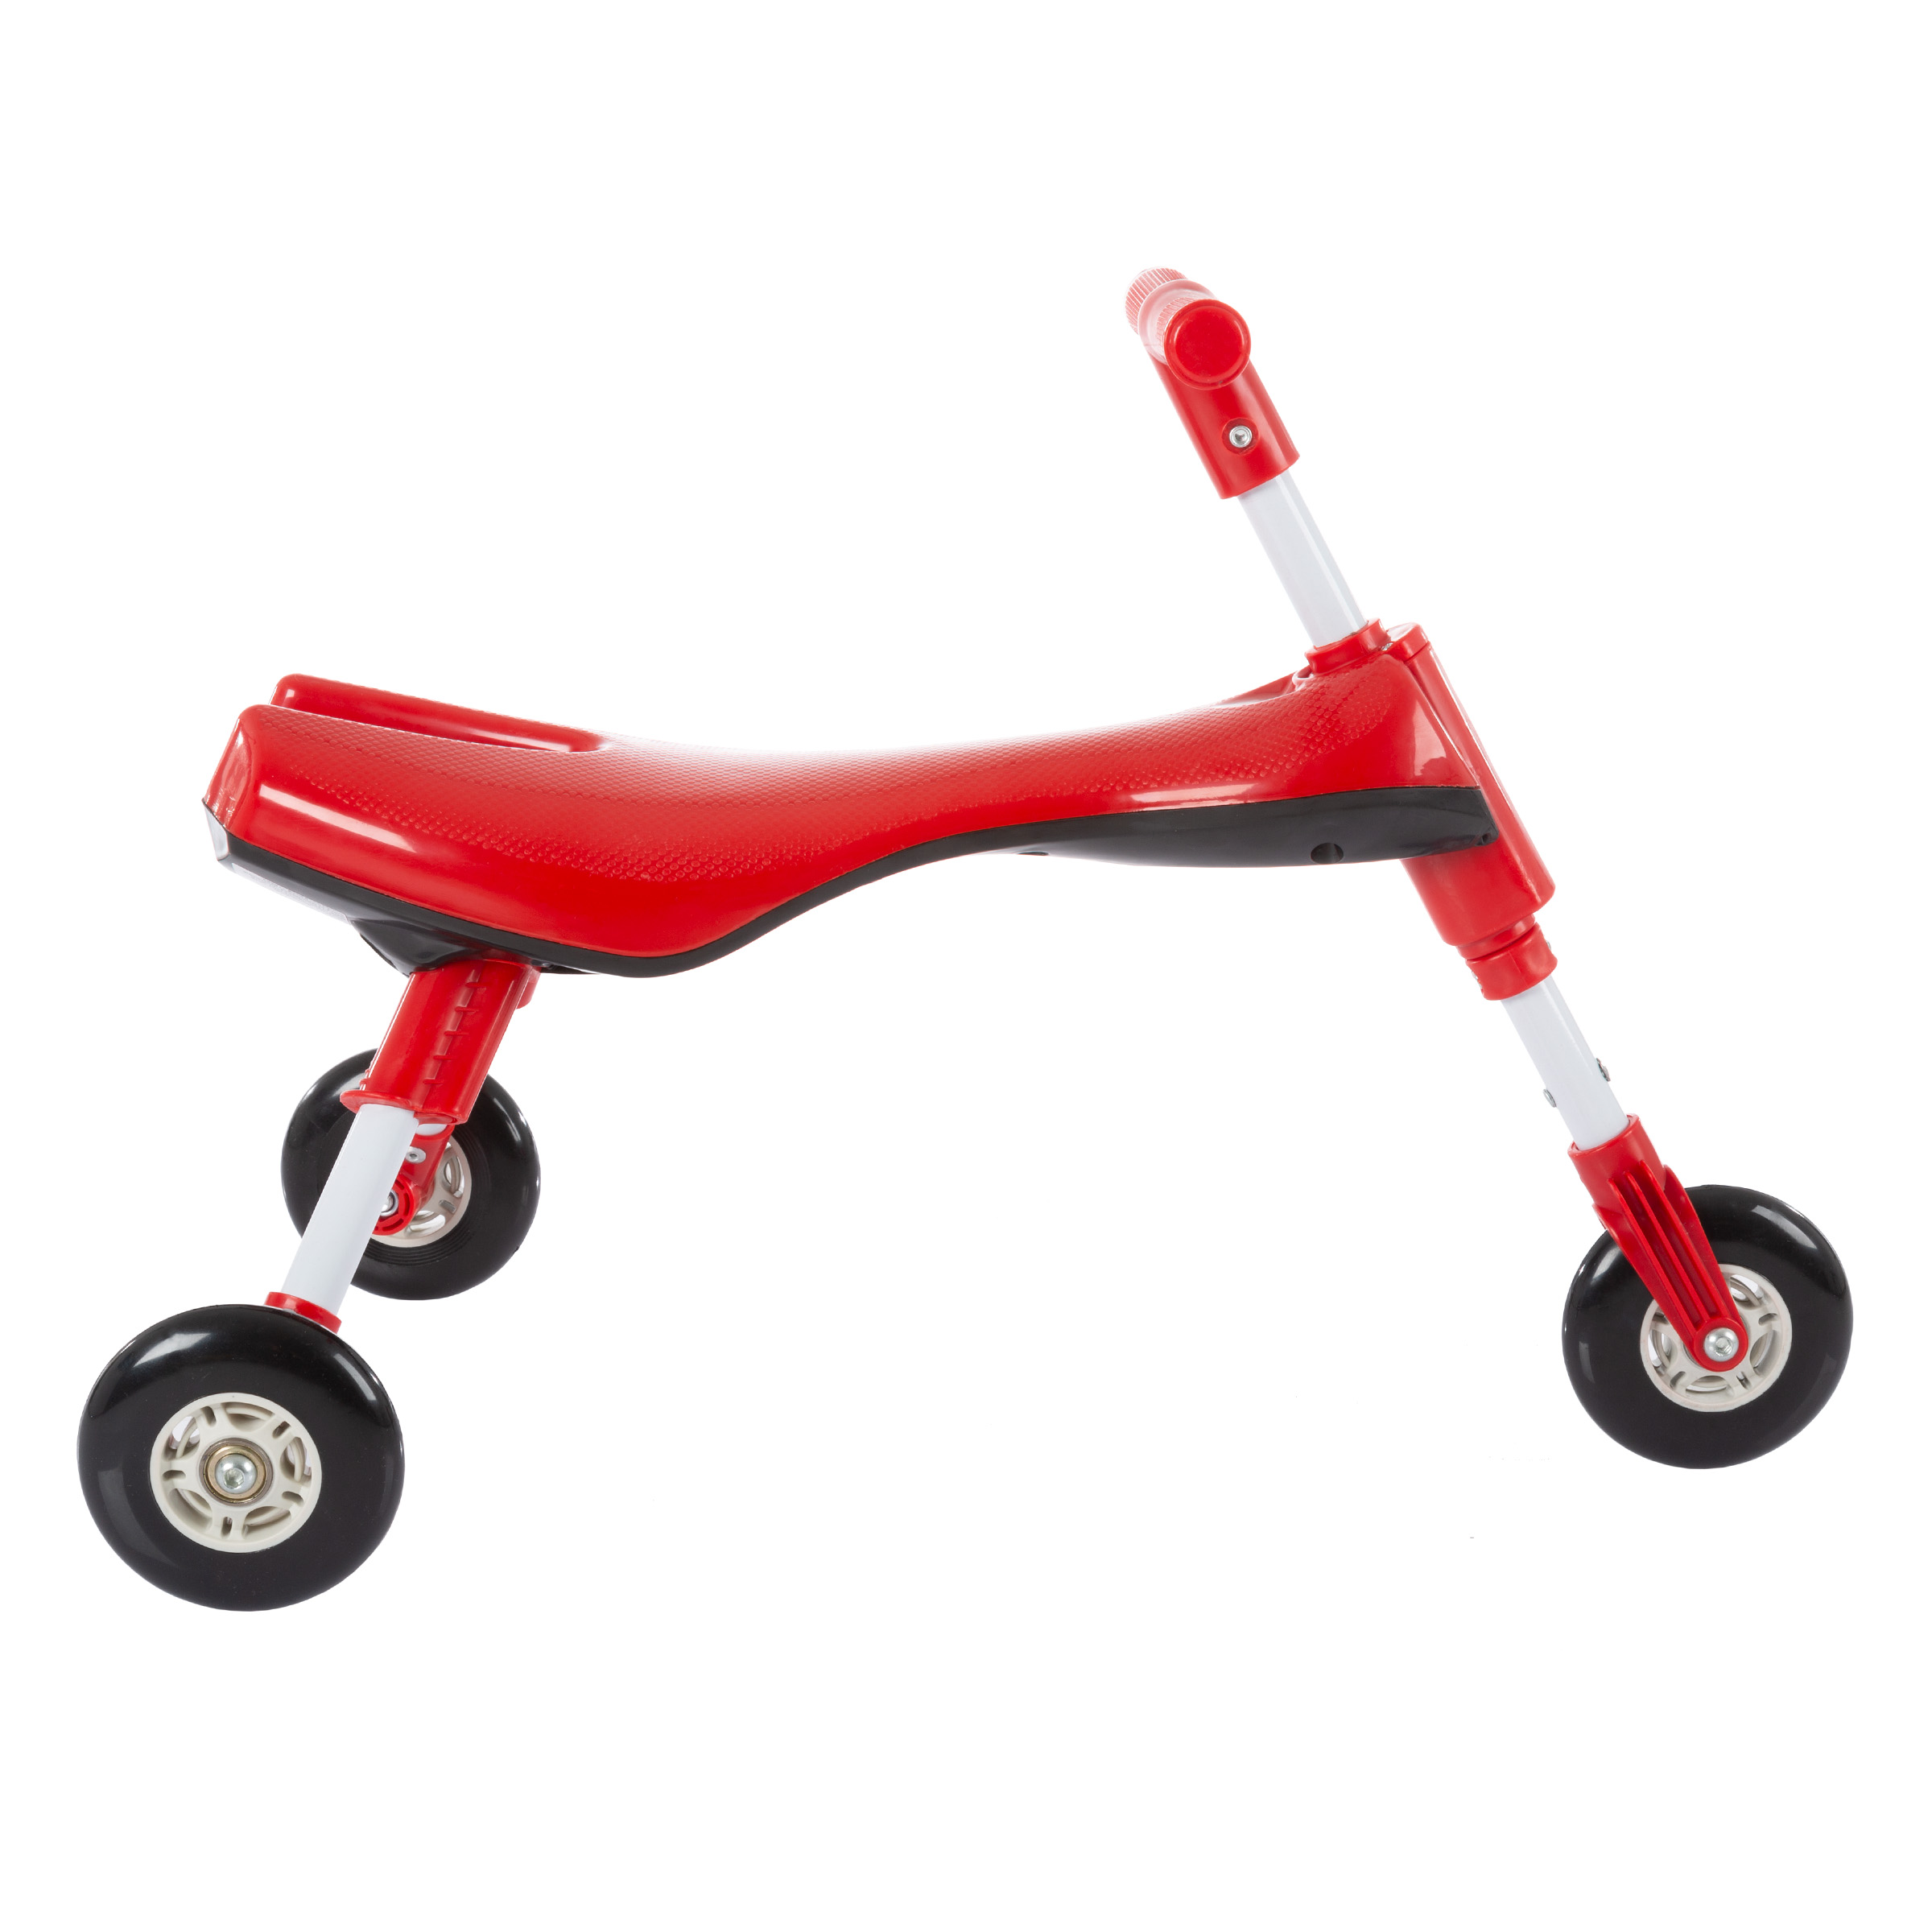 Glide Tricycle- Trike Ride On Toy with No Assembly, Foldable Design, Indoor Outdoor Wheels for Toddlers Learning to Walk, Balance by Lil’ Rider - image 4 of 7